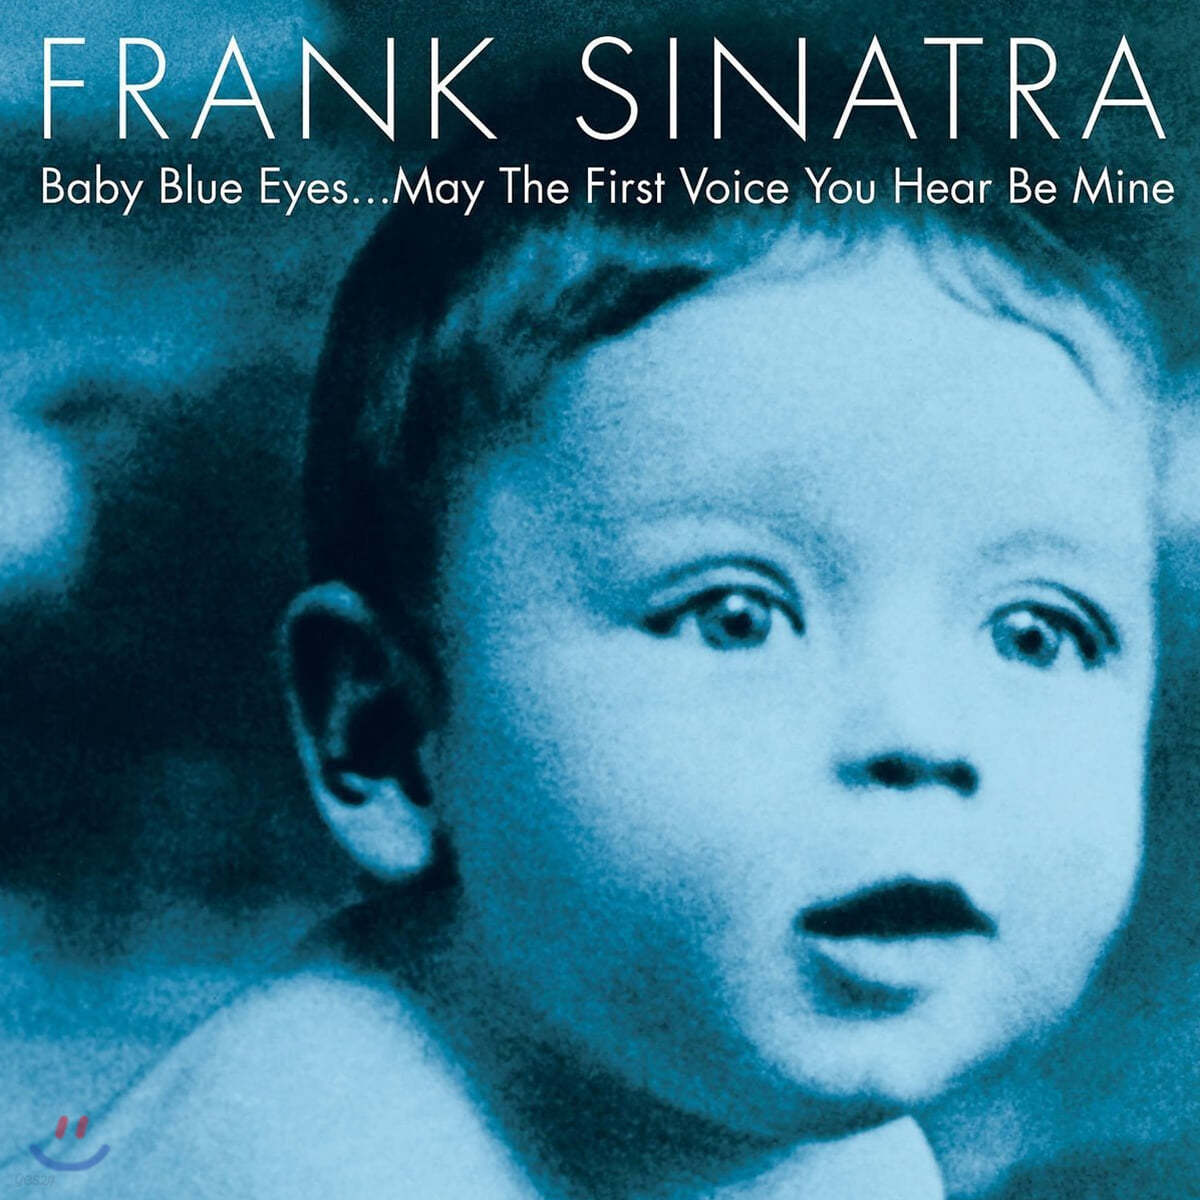 Frank Sinatra (프랭크 시나트라) - Baby Blue Eyes...May The First Voice You Hear Be Mine